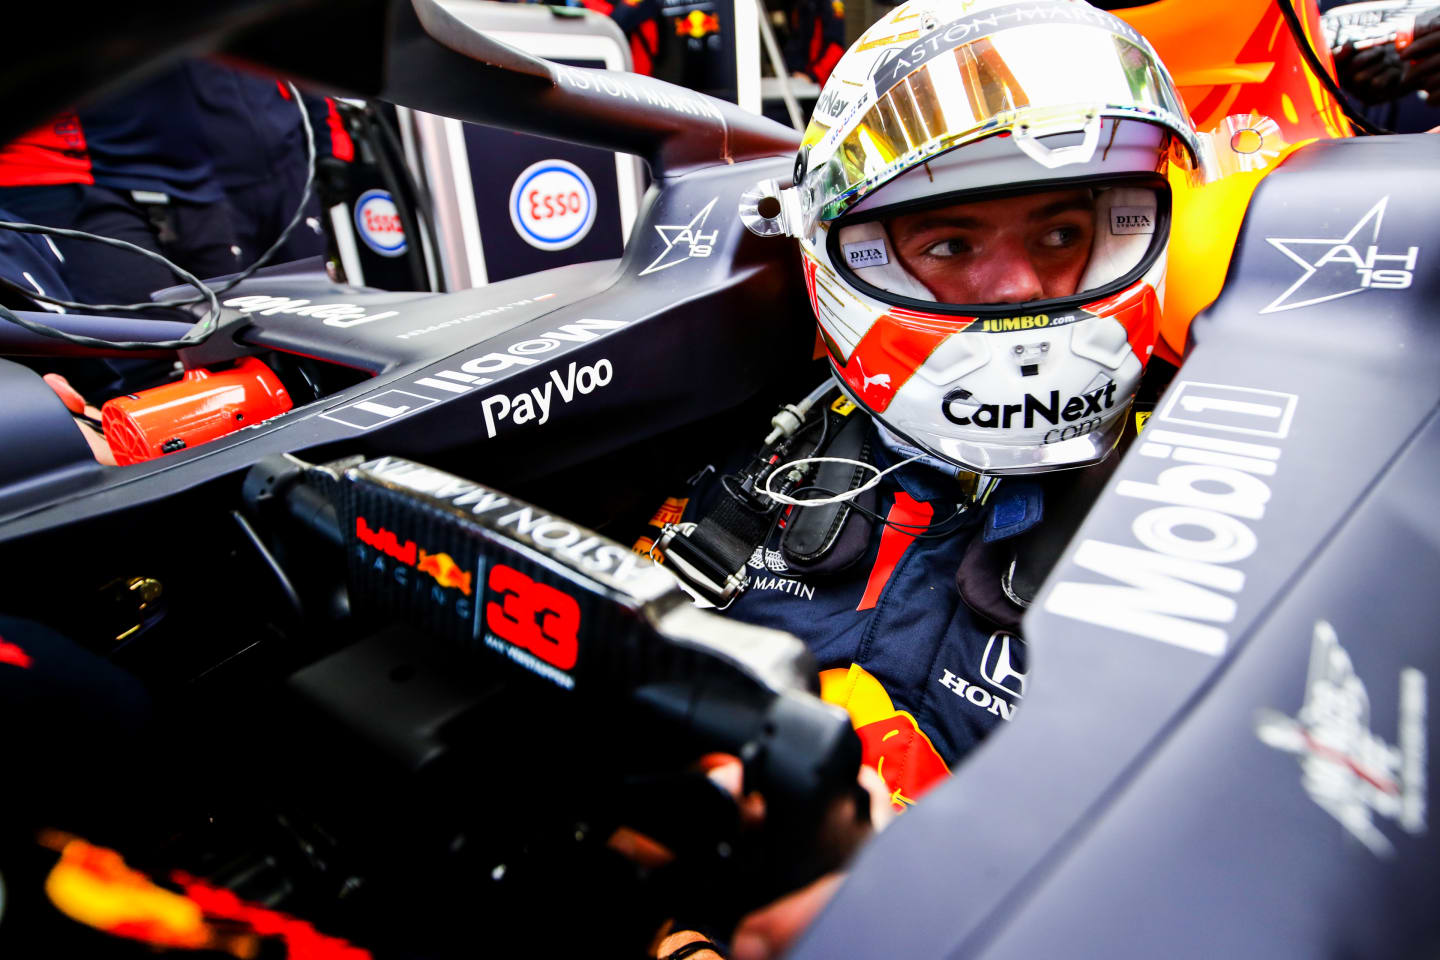 SPA, BELGIUM - AUGUST 29: Max Verstappen of Netherlands and Red Bull Racing prepares to drive during final practice for the F1 Grand Prix of Belgium at Circuit de Spa-Francorchamps on August 29, 2020 in Spa, Belgium. (Photo by Mark Thompson/Getty Images)